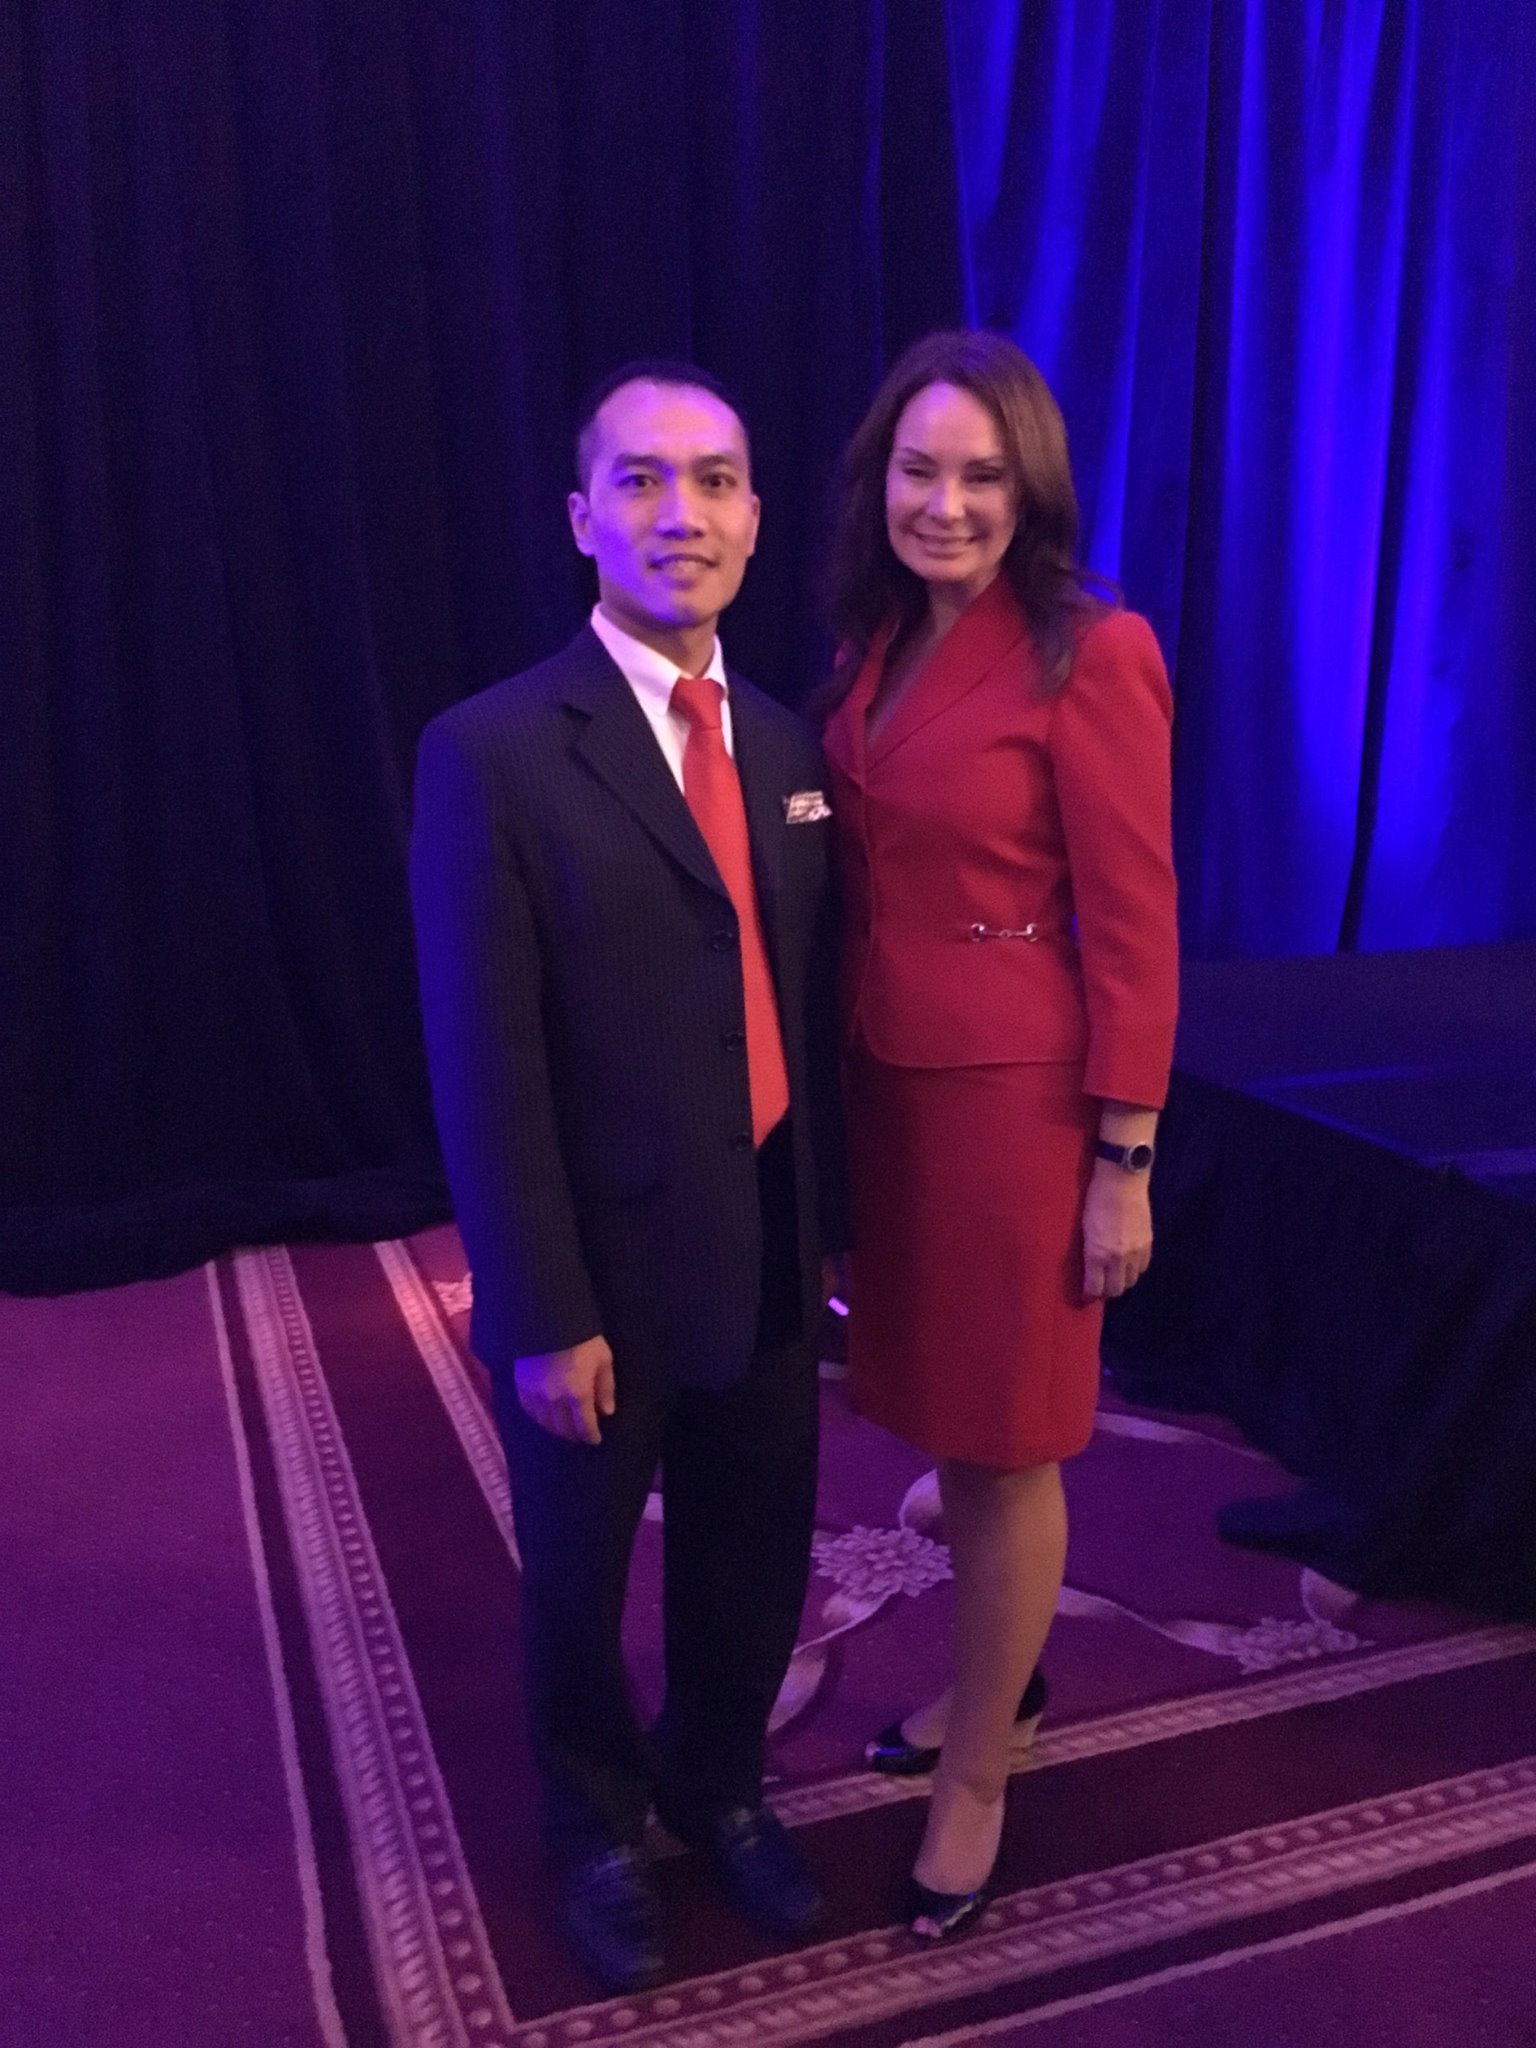 Pictured with Ms. Rosie Rios